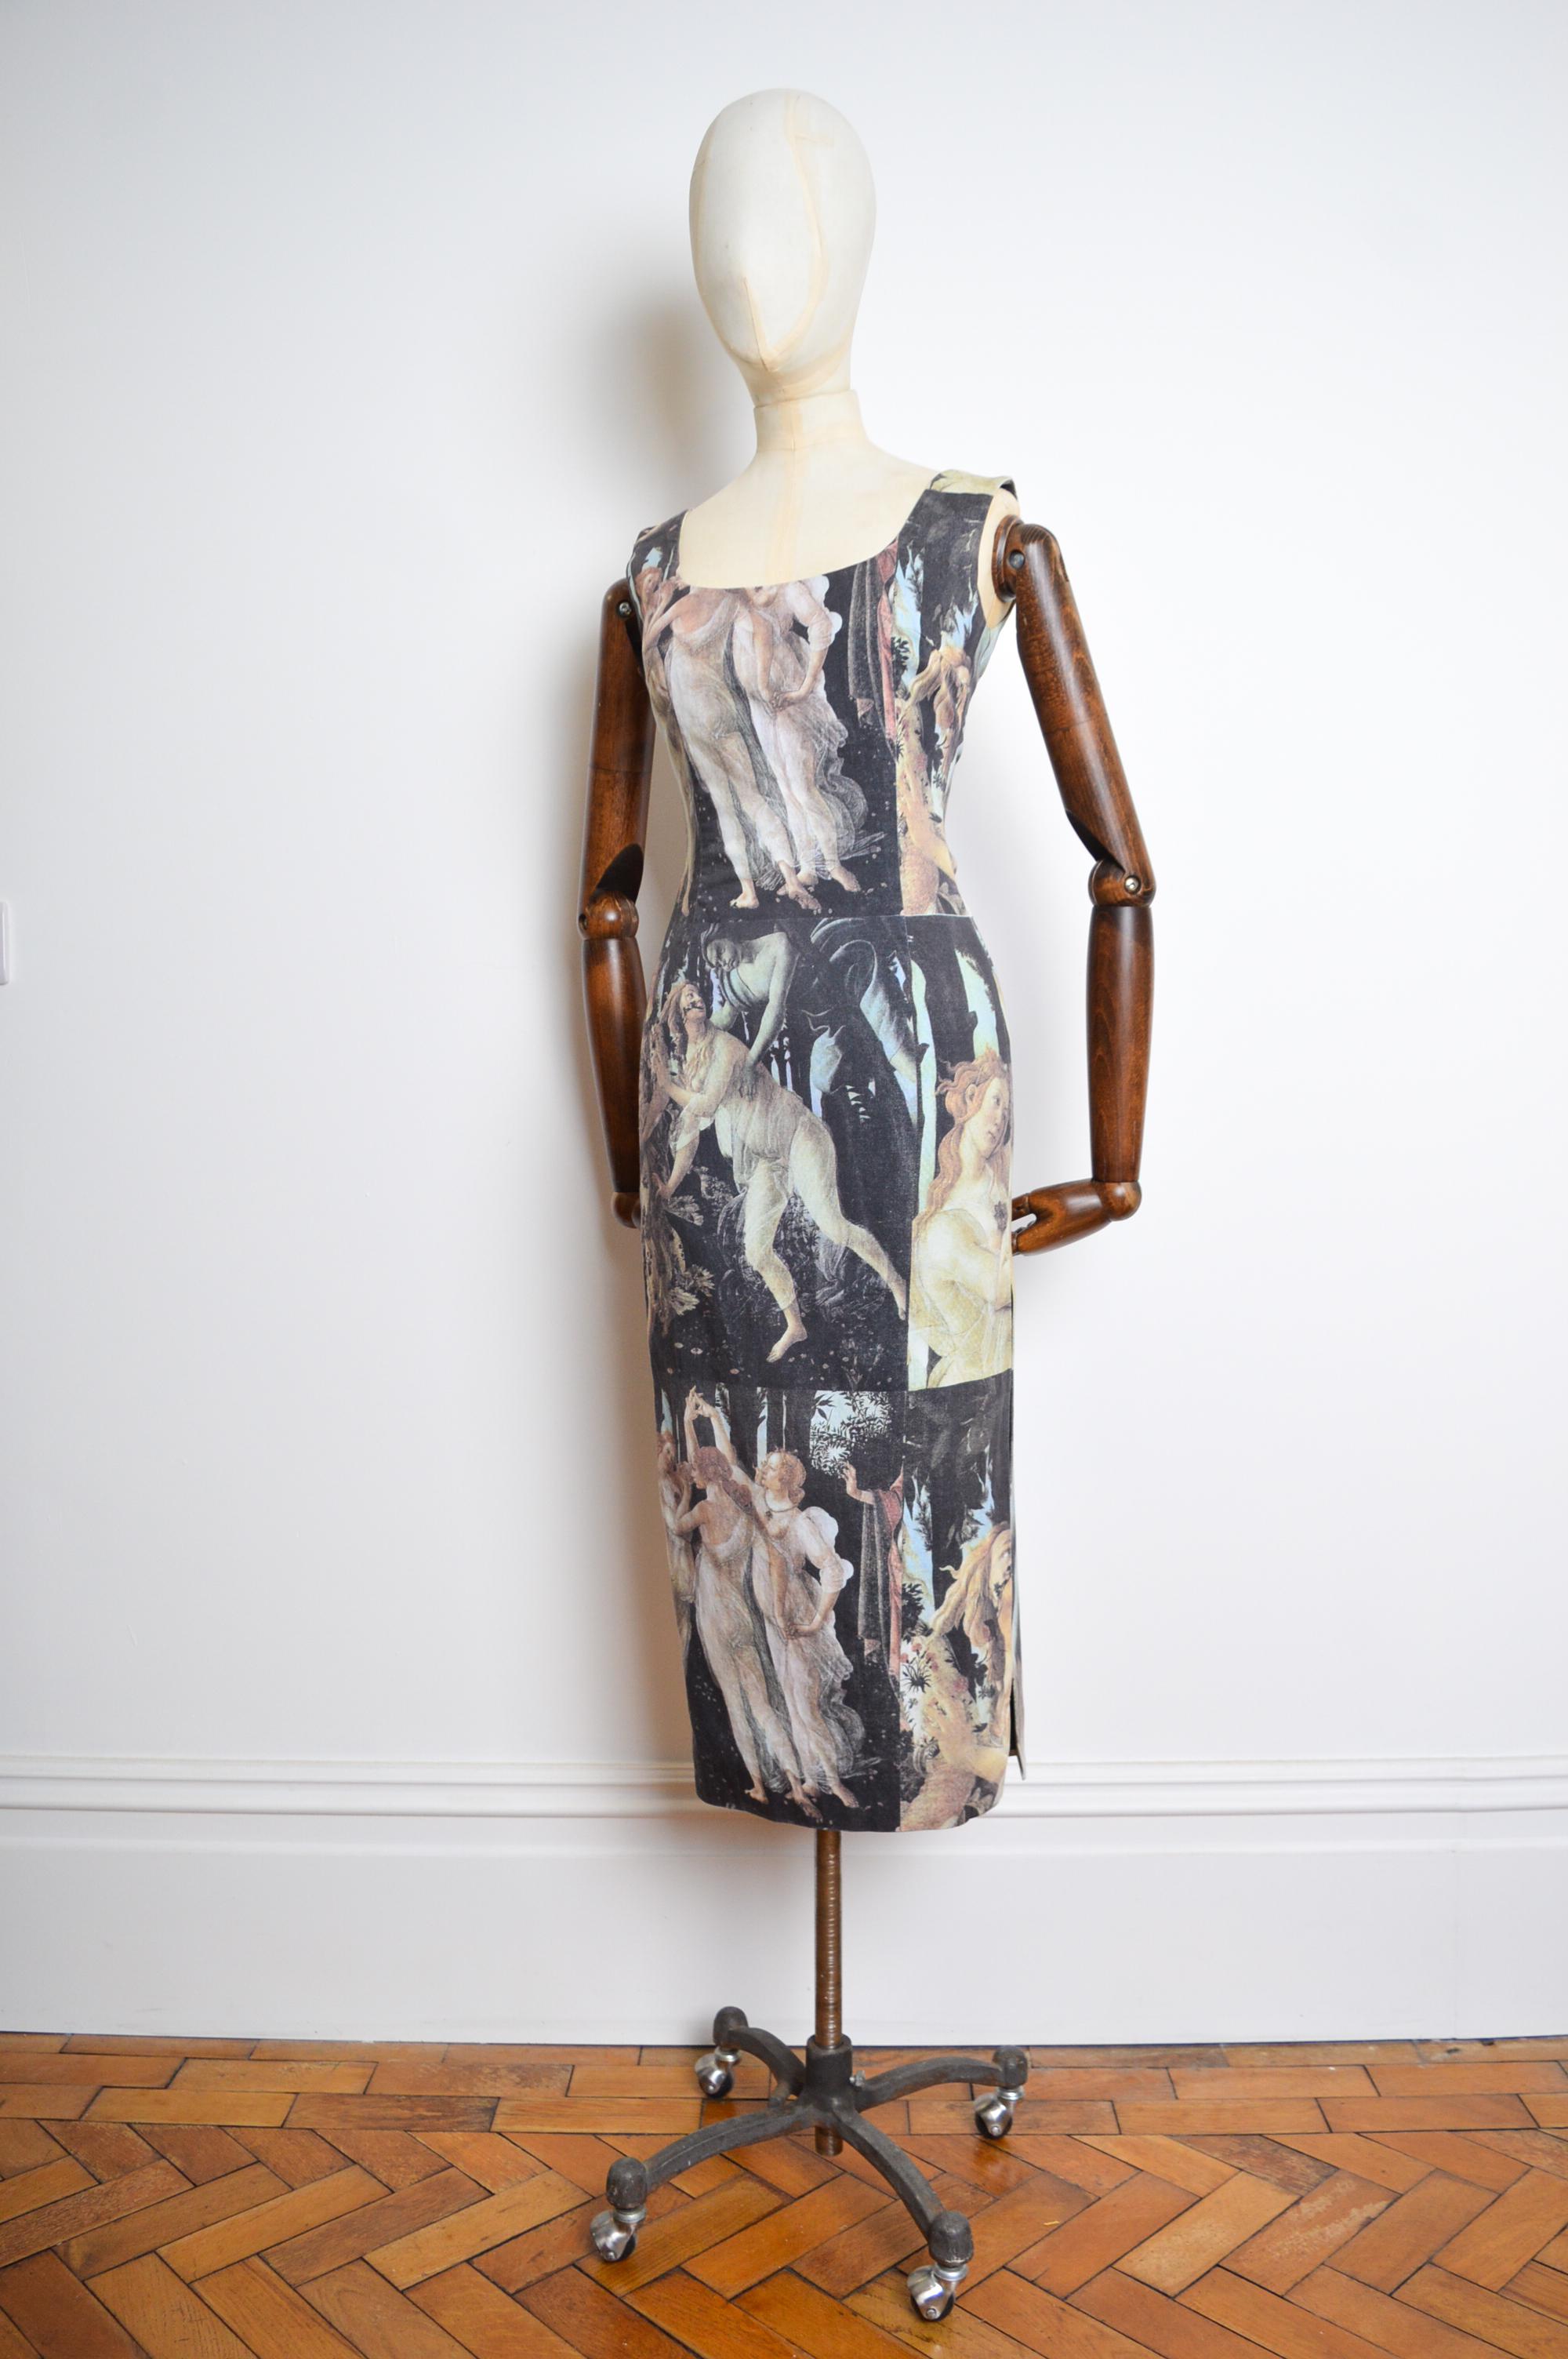 Spring / Summer 1993 DOLCE & GABBANA Cocktail dress, adorned in the Art work of Botticelli's 'Primavera'.

Runway Looks 27 & 28.

MADE IN ITALY.

100% Cotton / Concealed zip up back.

Recommended Size UK 8-10. 

Measurements are given in Inches